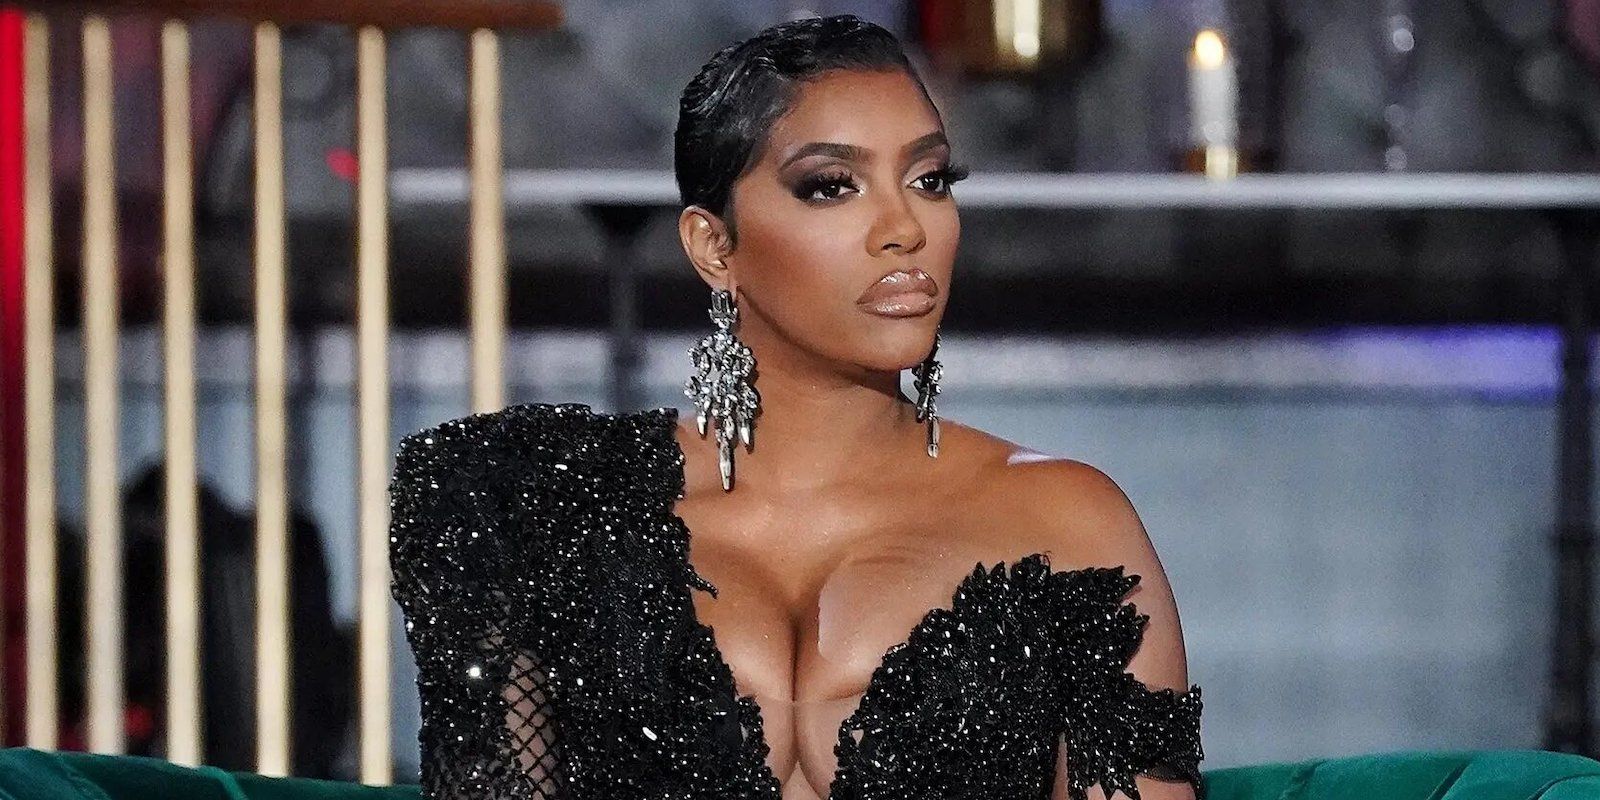 Porsha Williams sits in Black gown looking indignant at RHOA S13 reunion